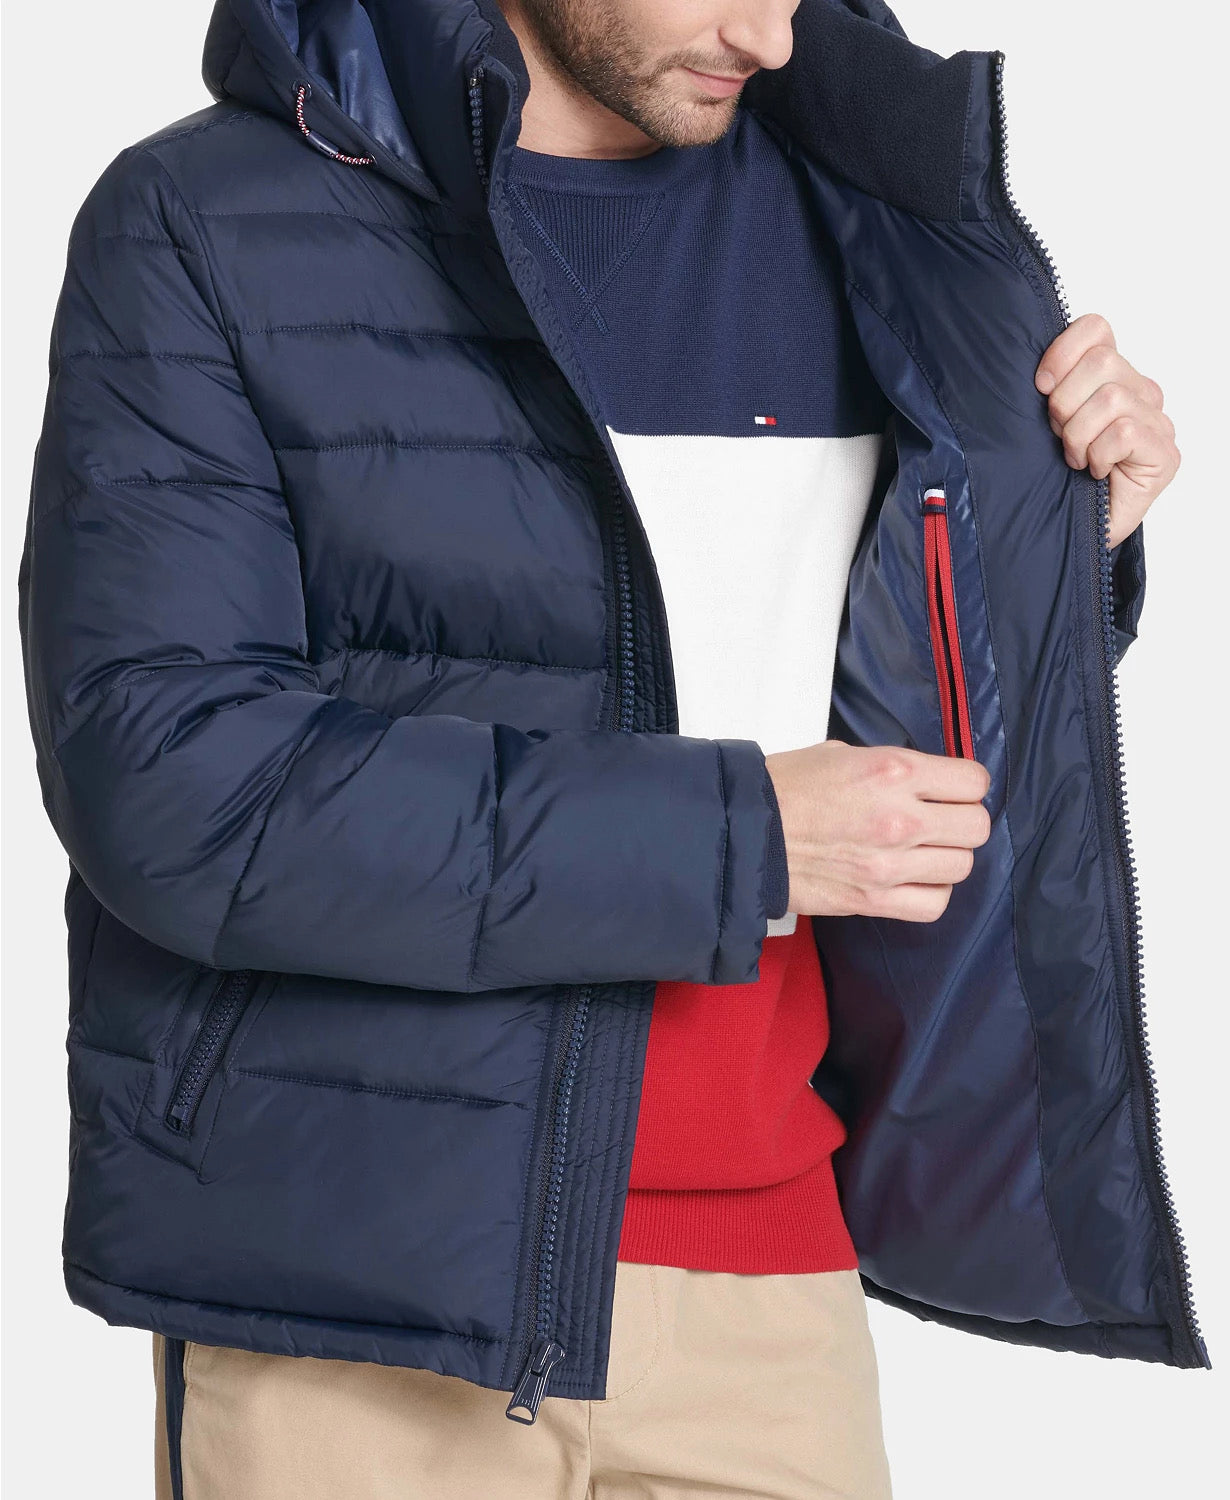 Tommy Hilfiger Men's Quilted Puffer Jacket Navy Blue Large